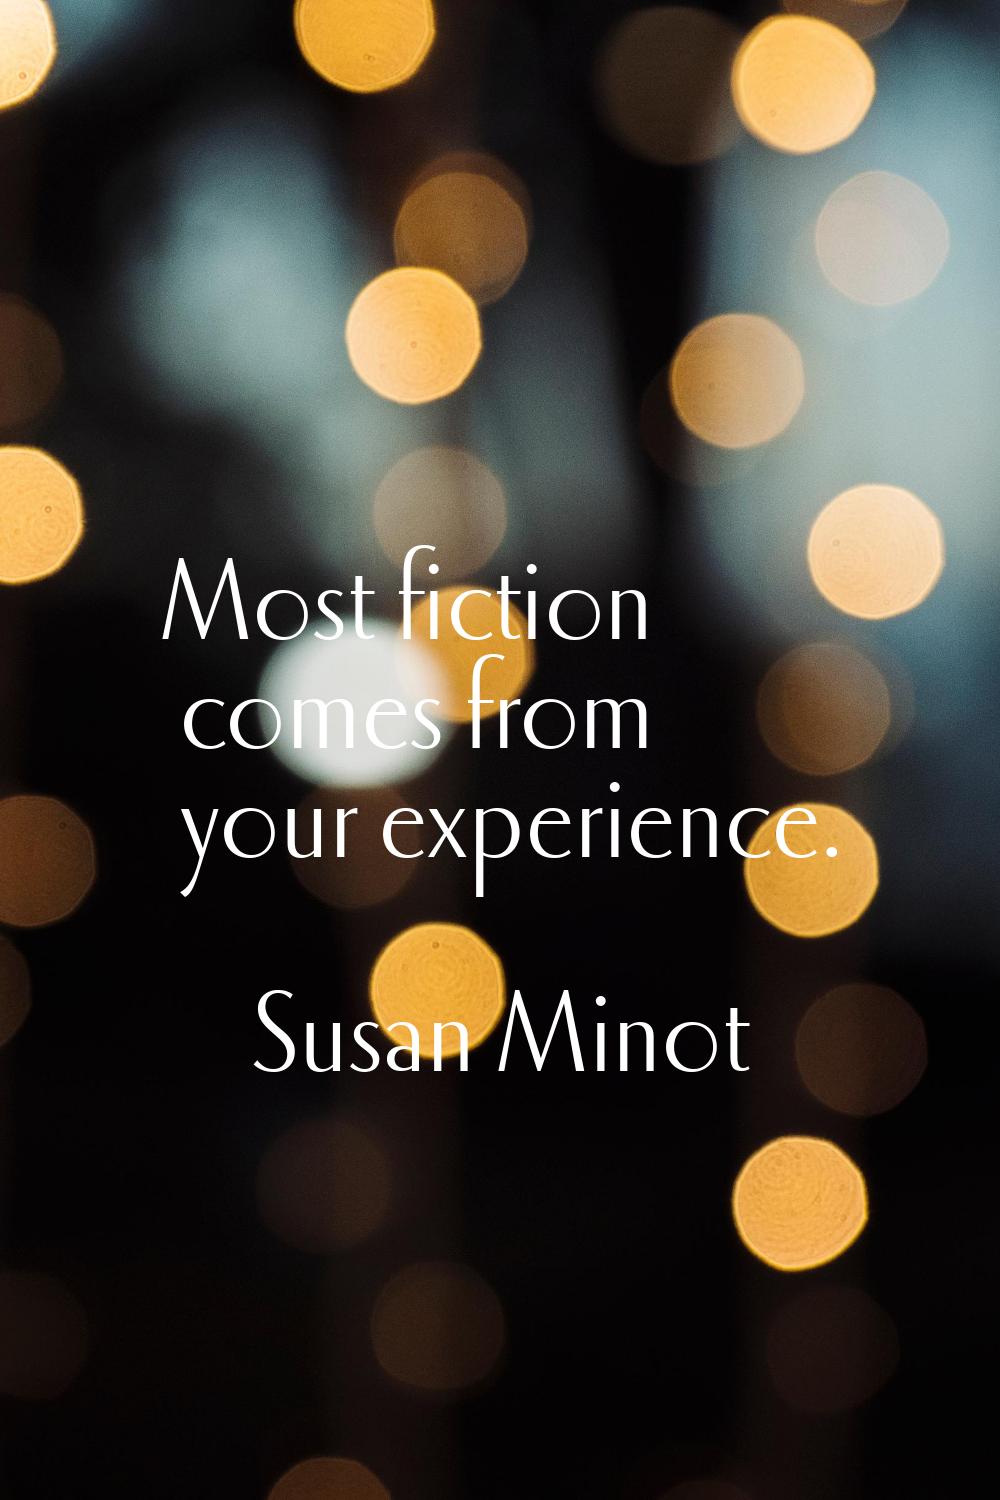 Most fiction comes from your experience.